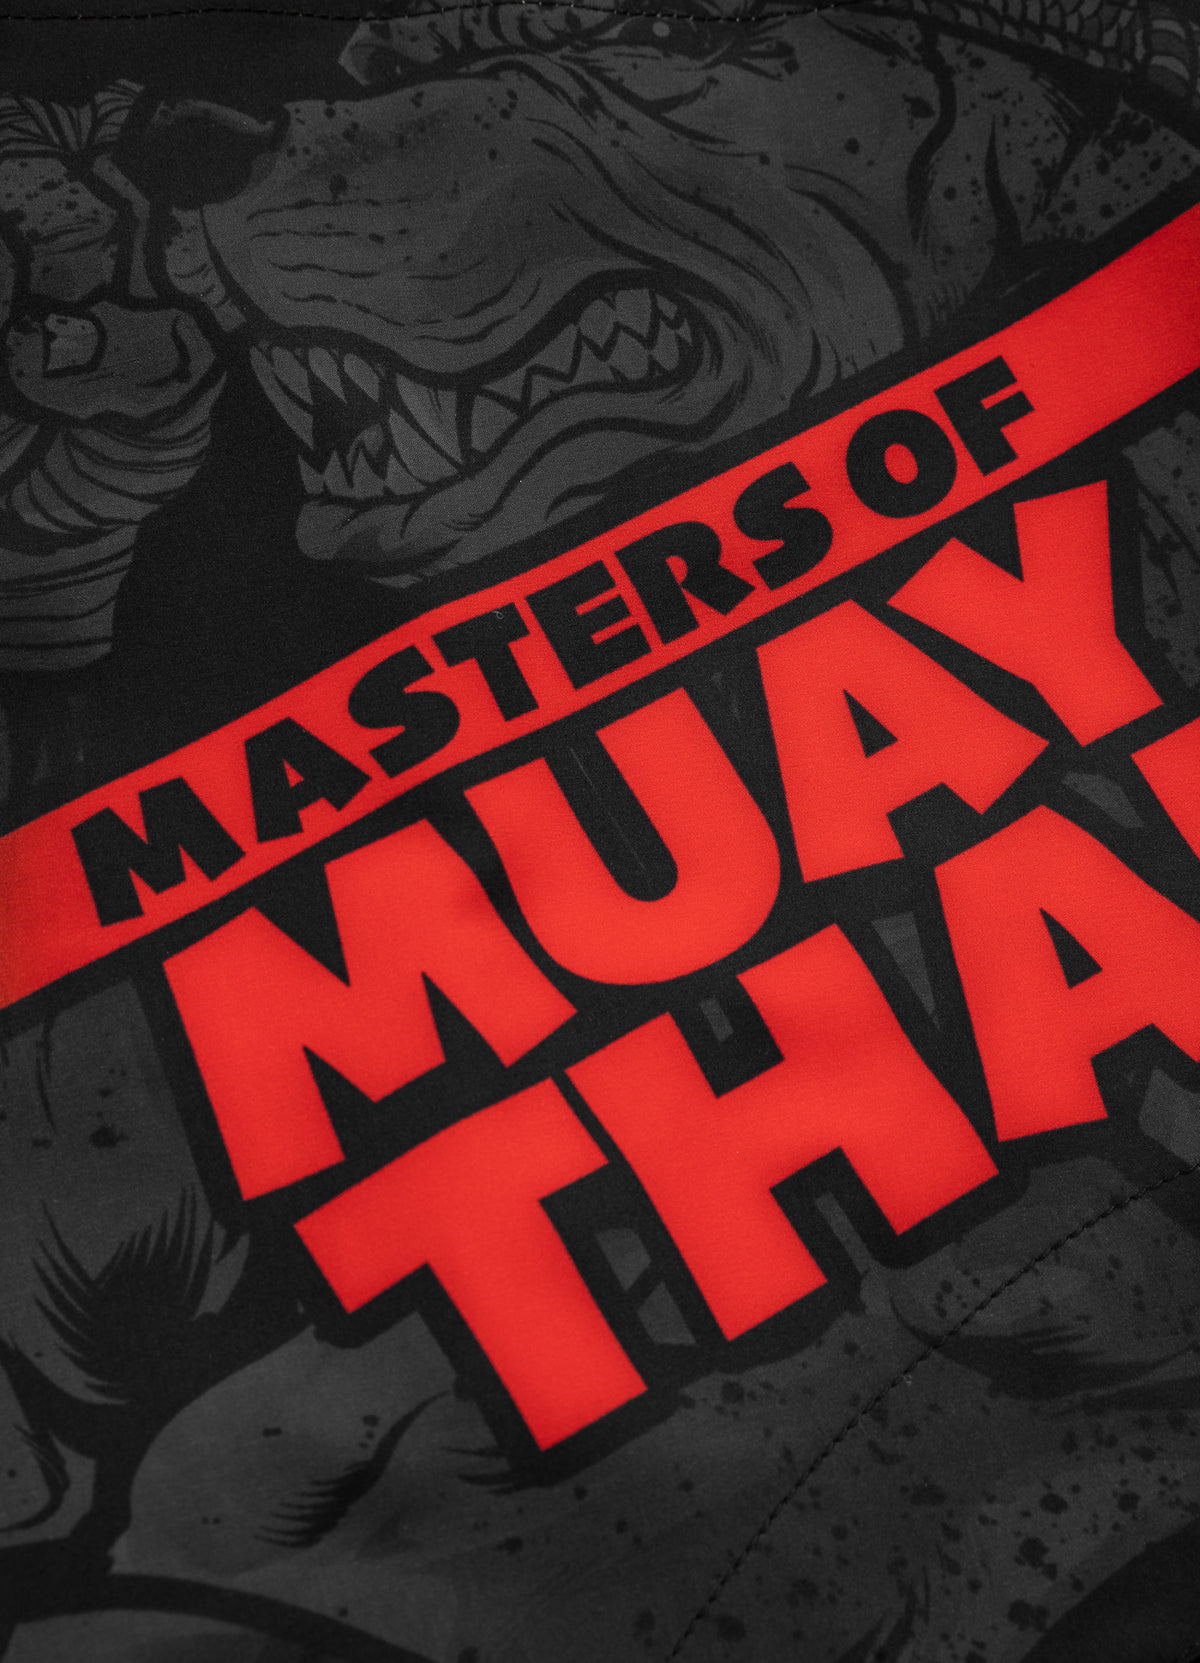 MASTERS OF MUAY THAI HILLTOP Grappling Shorts